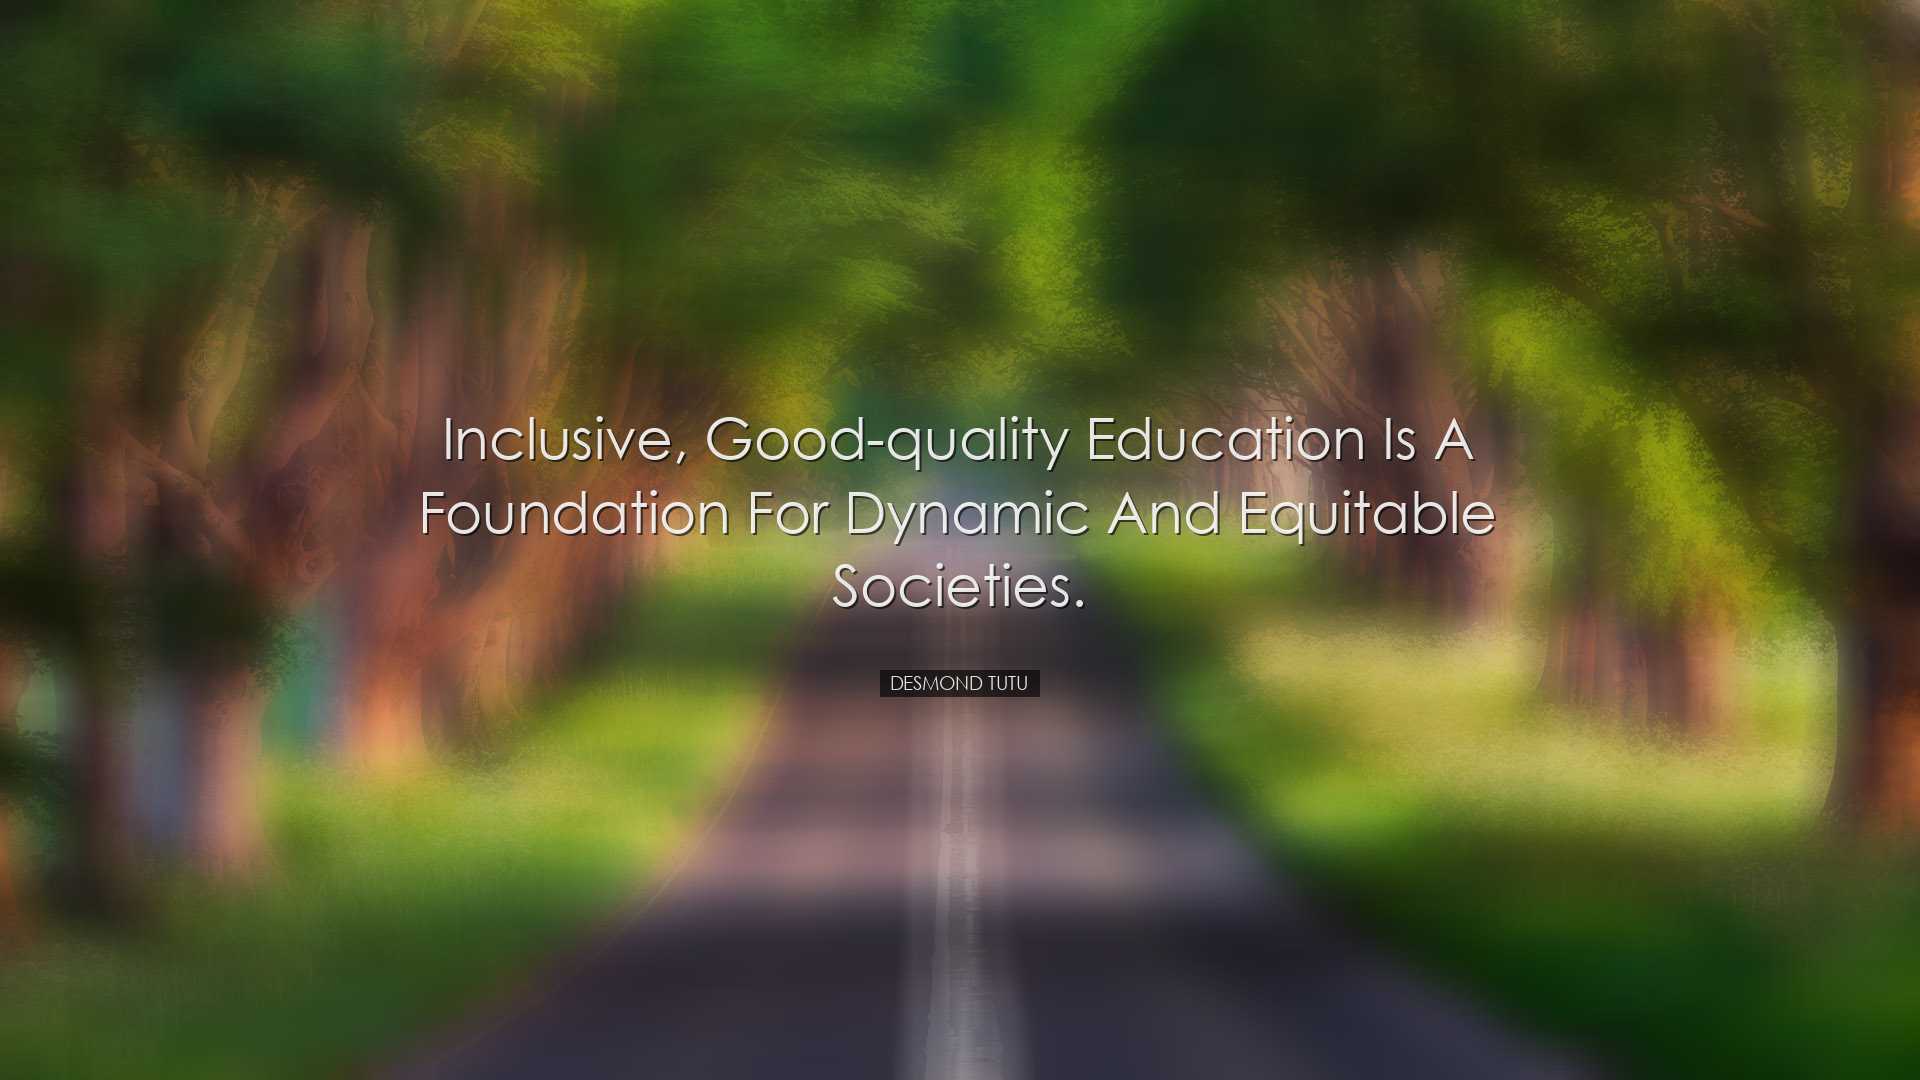 Inclusive, good-quality education is a foundation for dynamic and